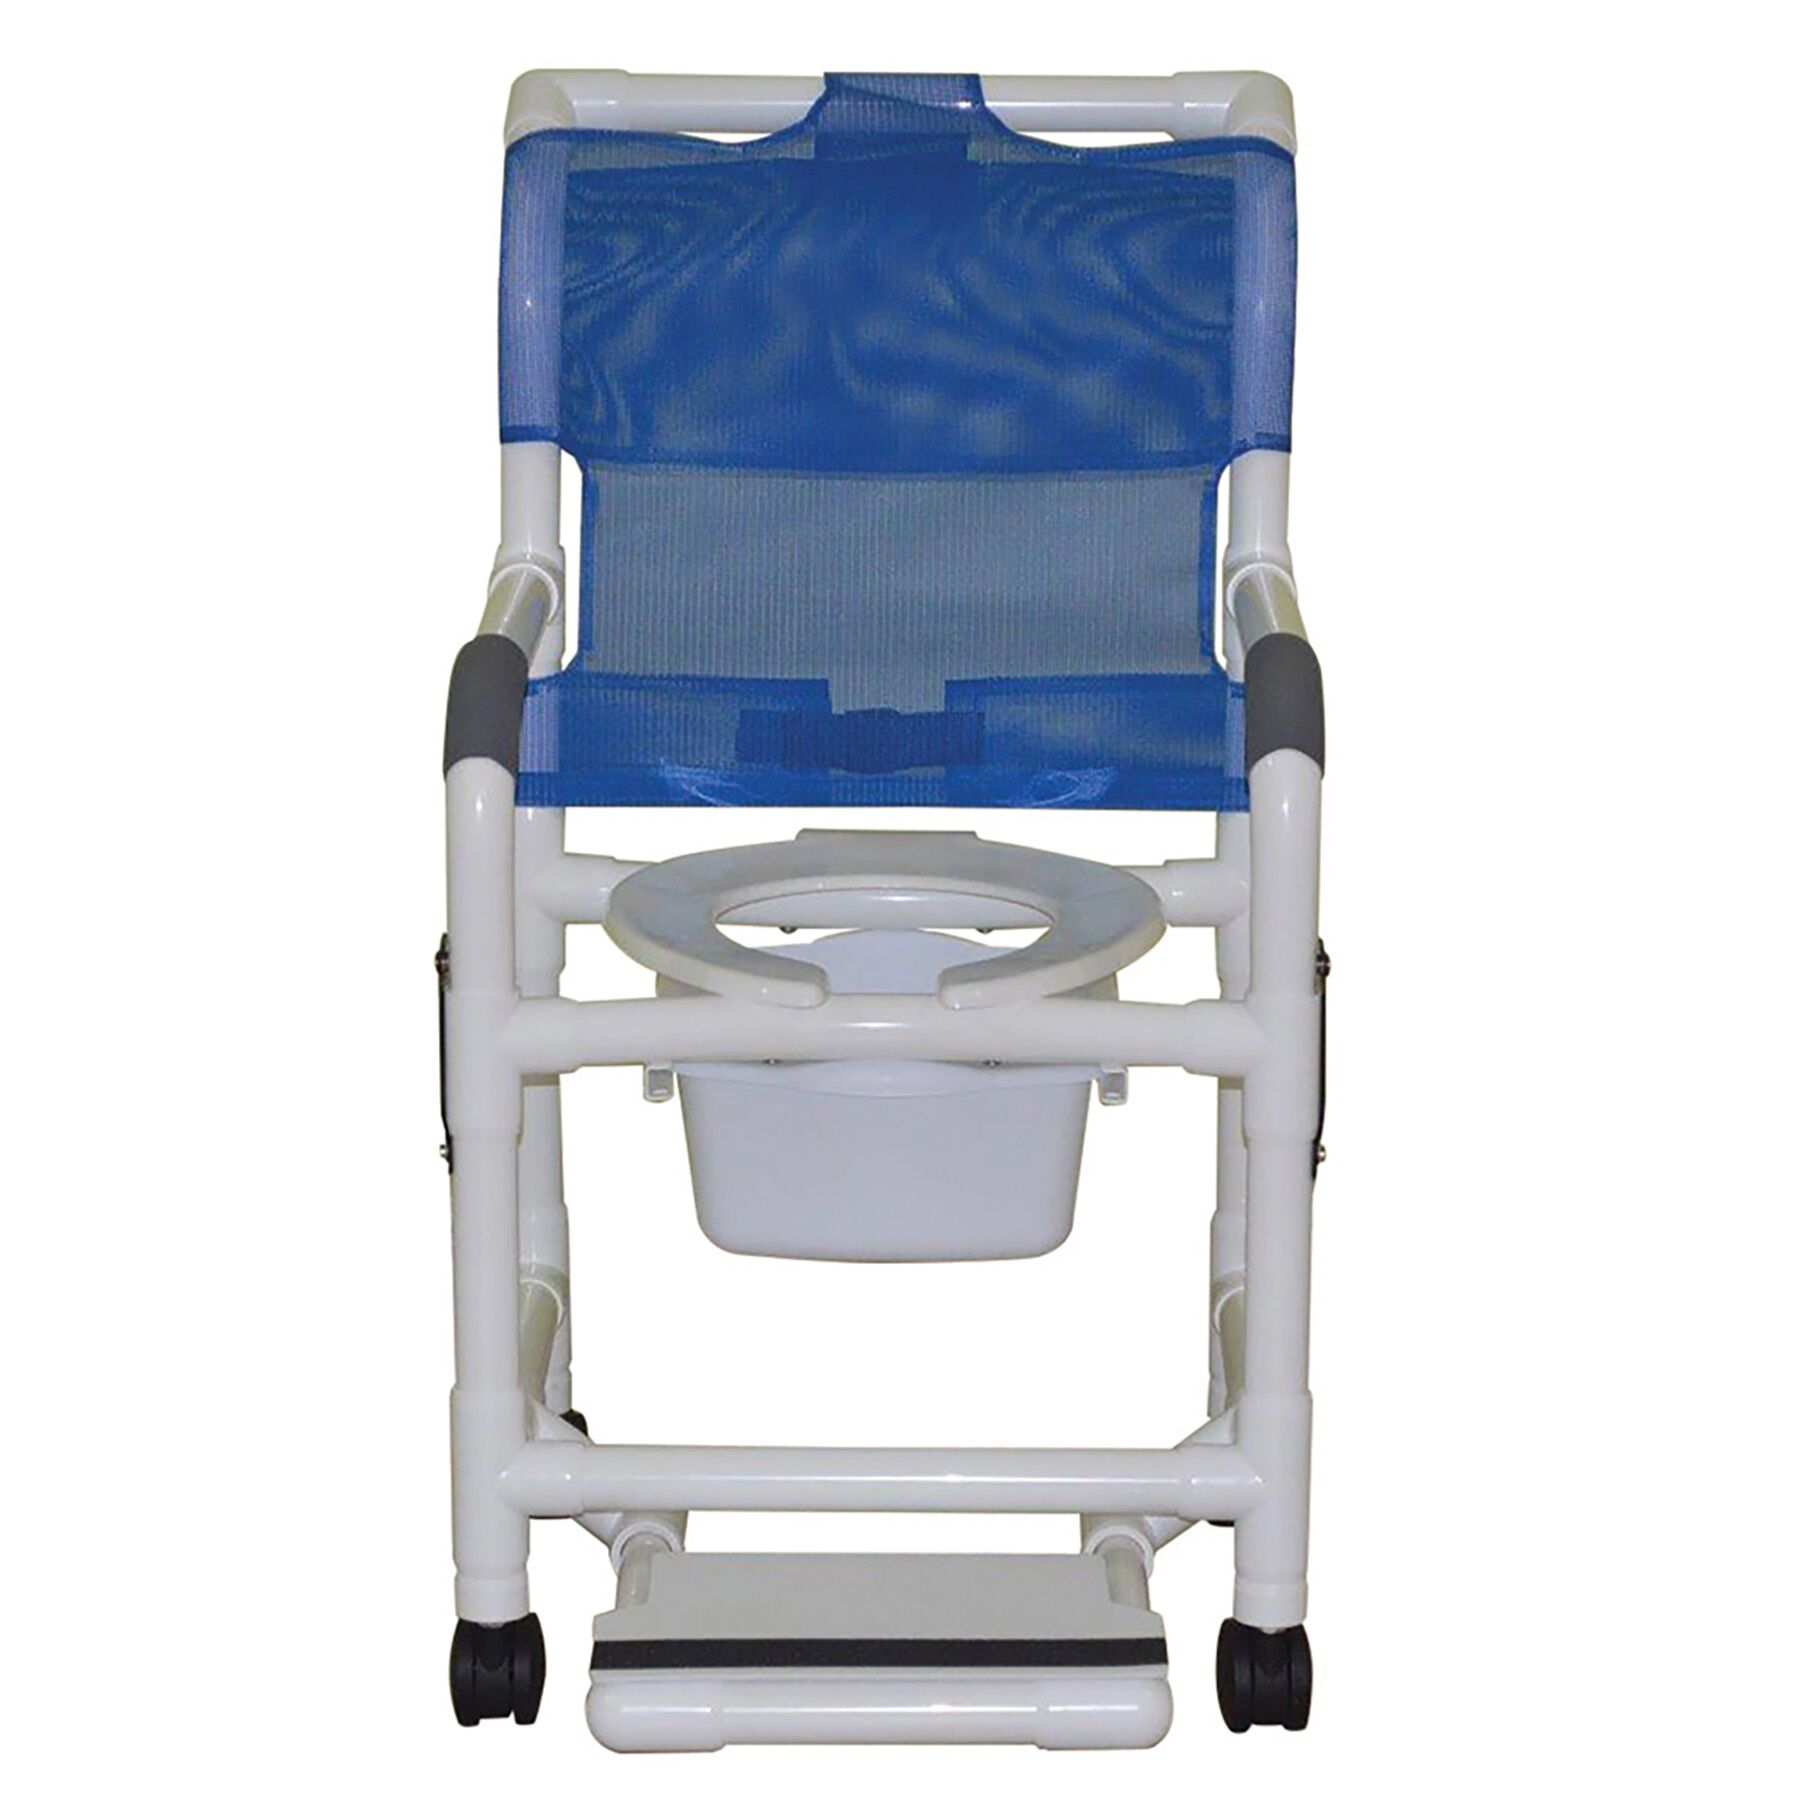 18″ Shower Chair W/ Open Front, Double Drop Arm And Slide Out Footrest